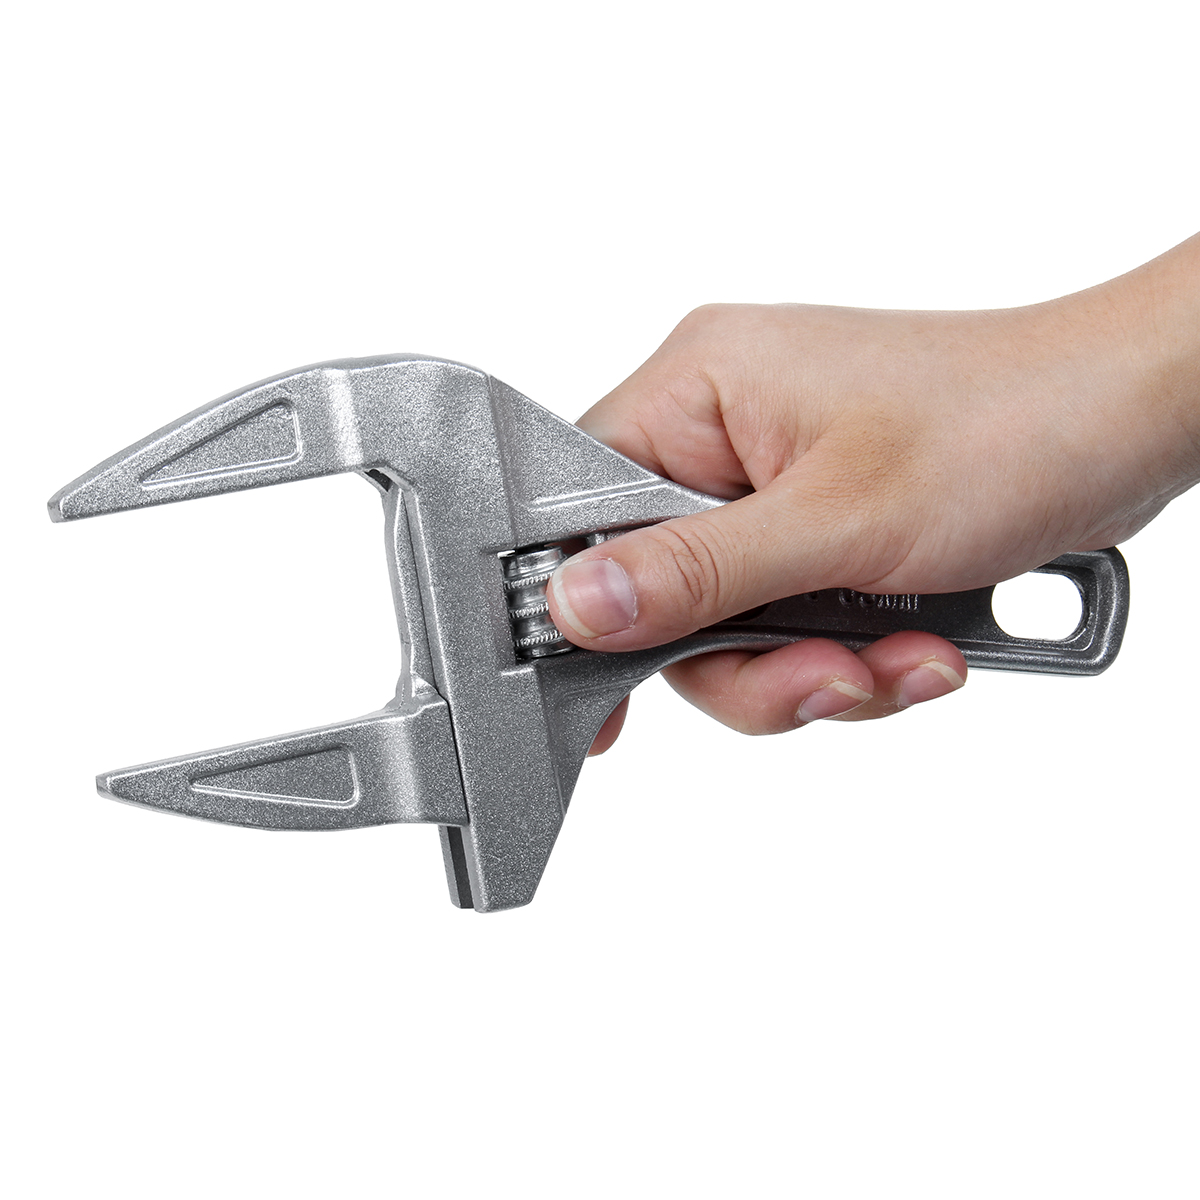 Adjustable-Spanner-16-68mm-Big-Opening-Spanner-Wrench-Mini-Nut-Key-Hand-Tools-Metal-Universal-Spanne-1625089-3